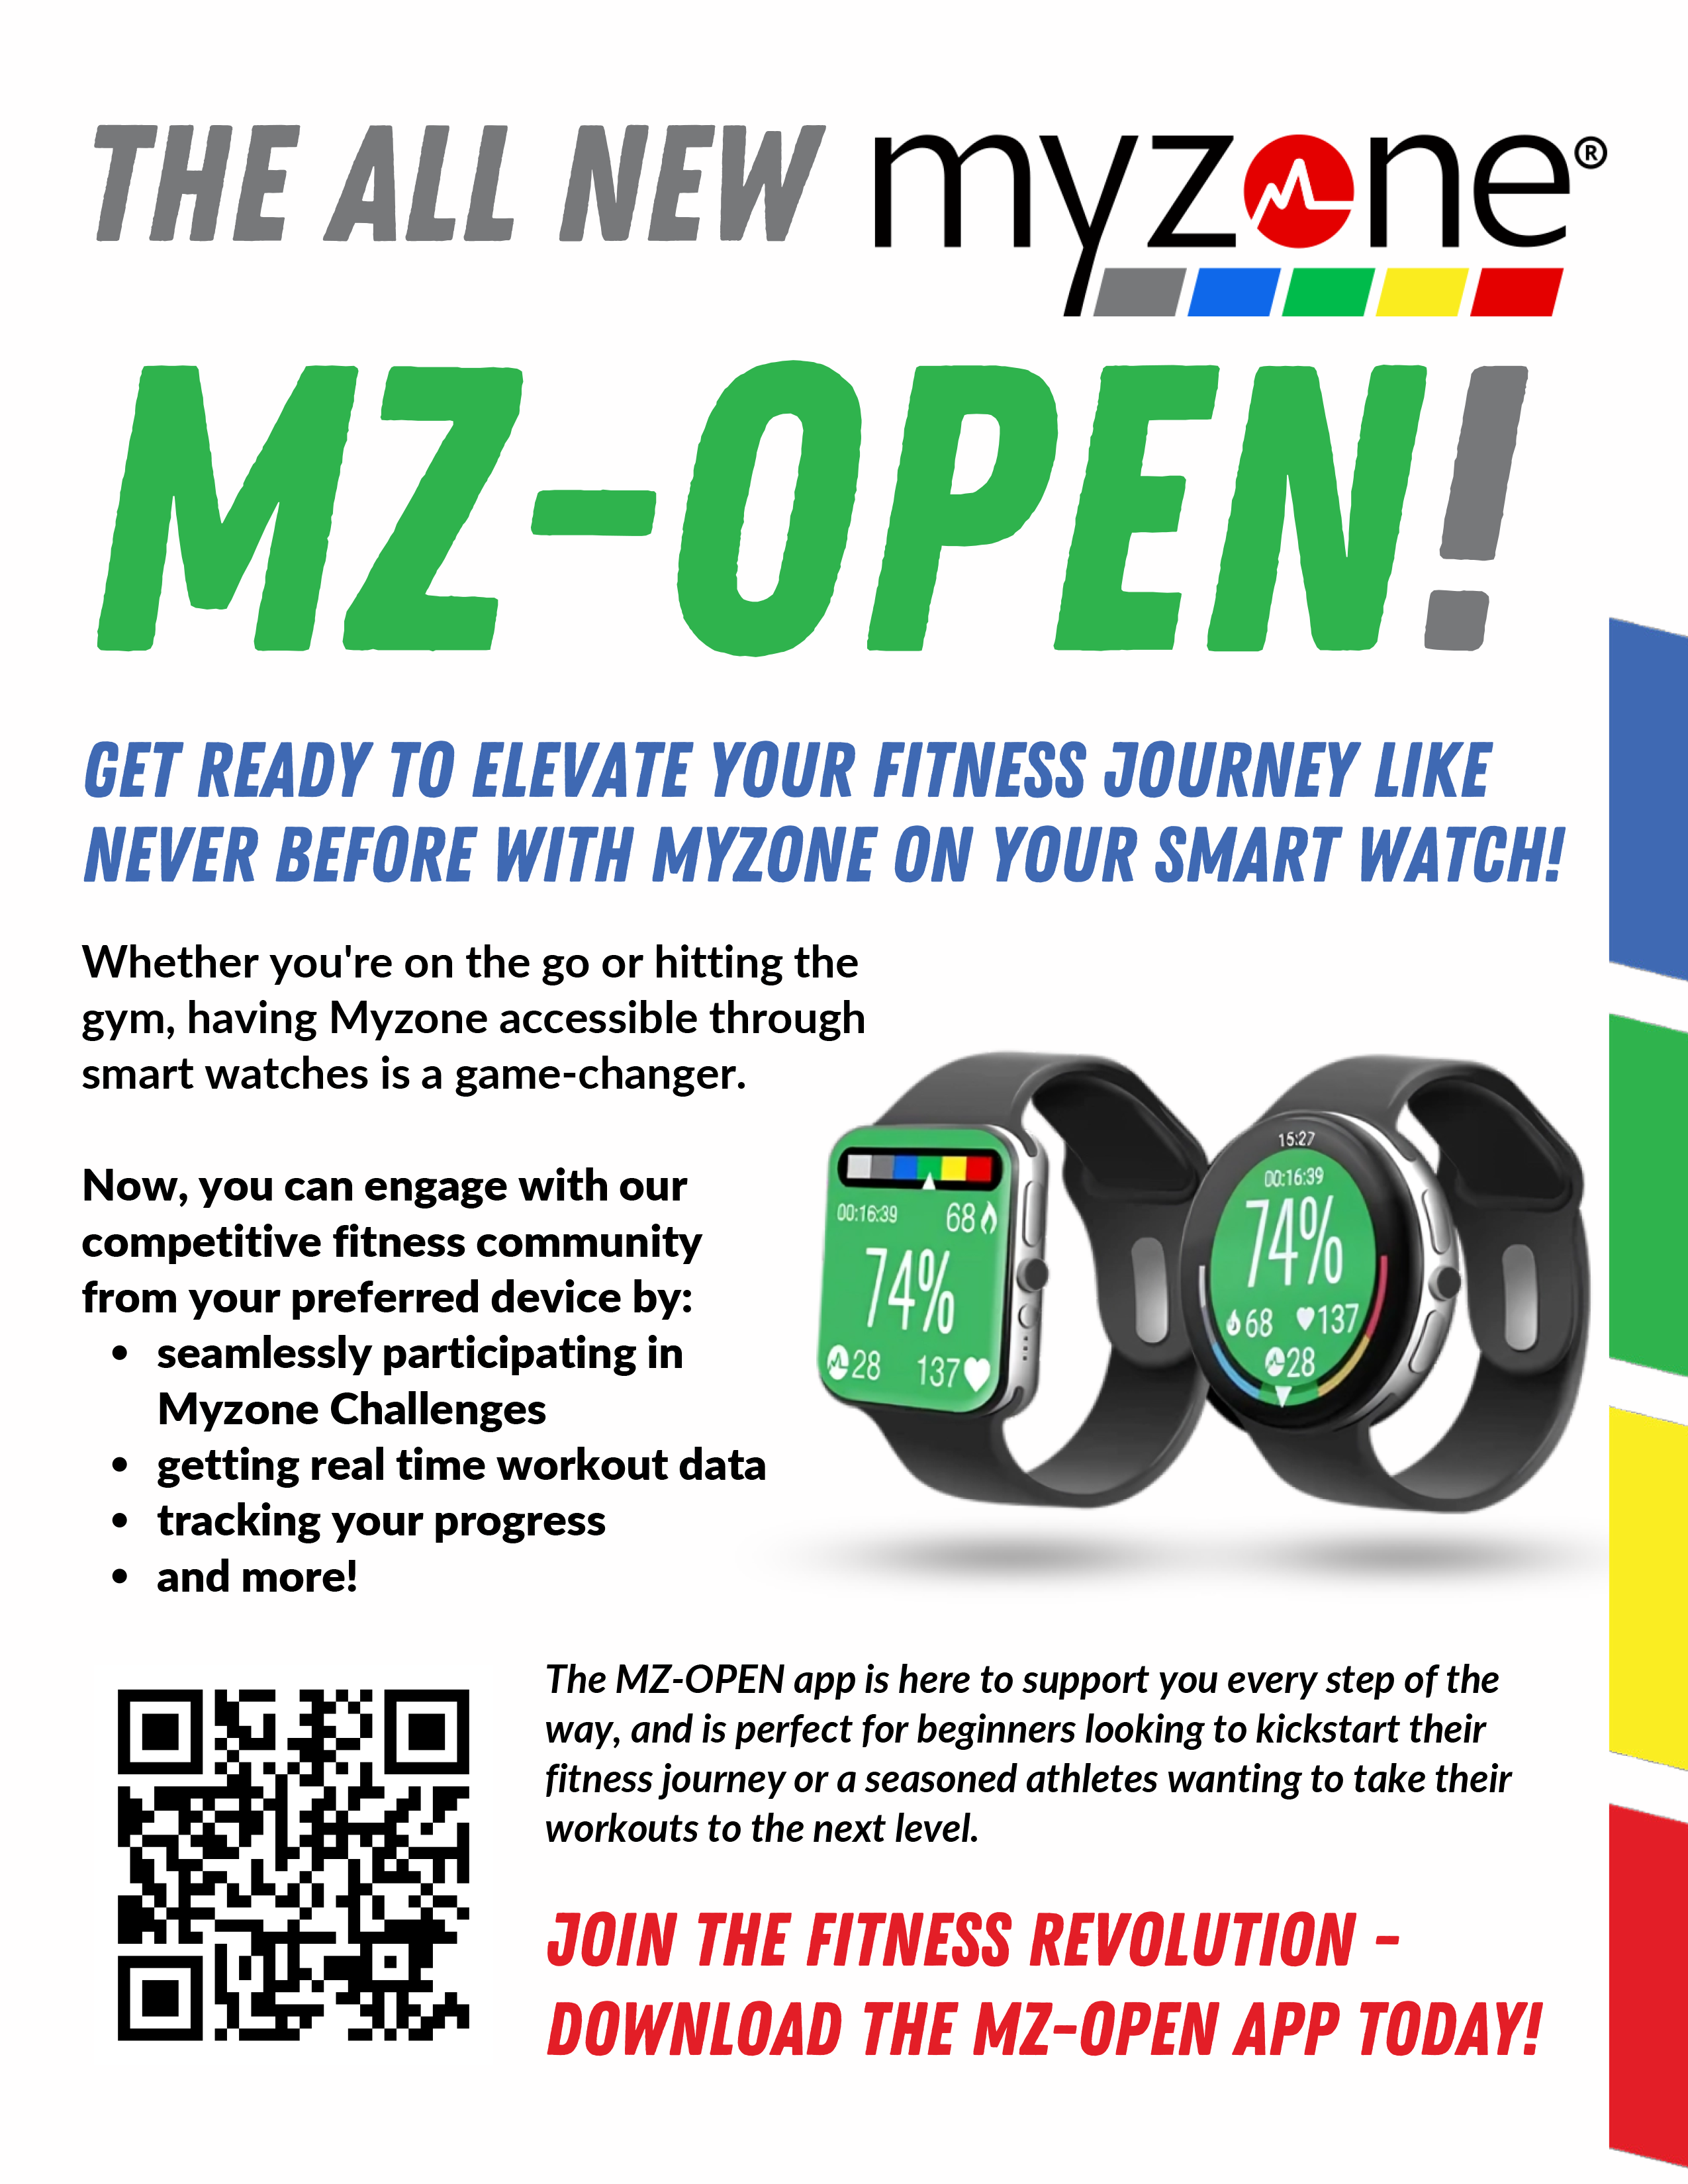 Wheaton Sport Center Fitness Promos - MZ Open. Use MyZone with your Smart Watch!